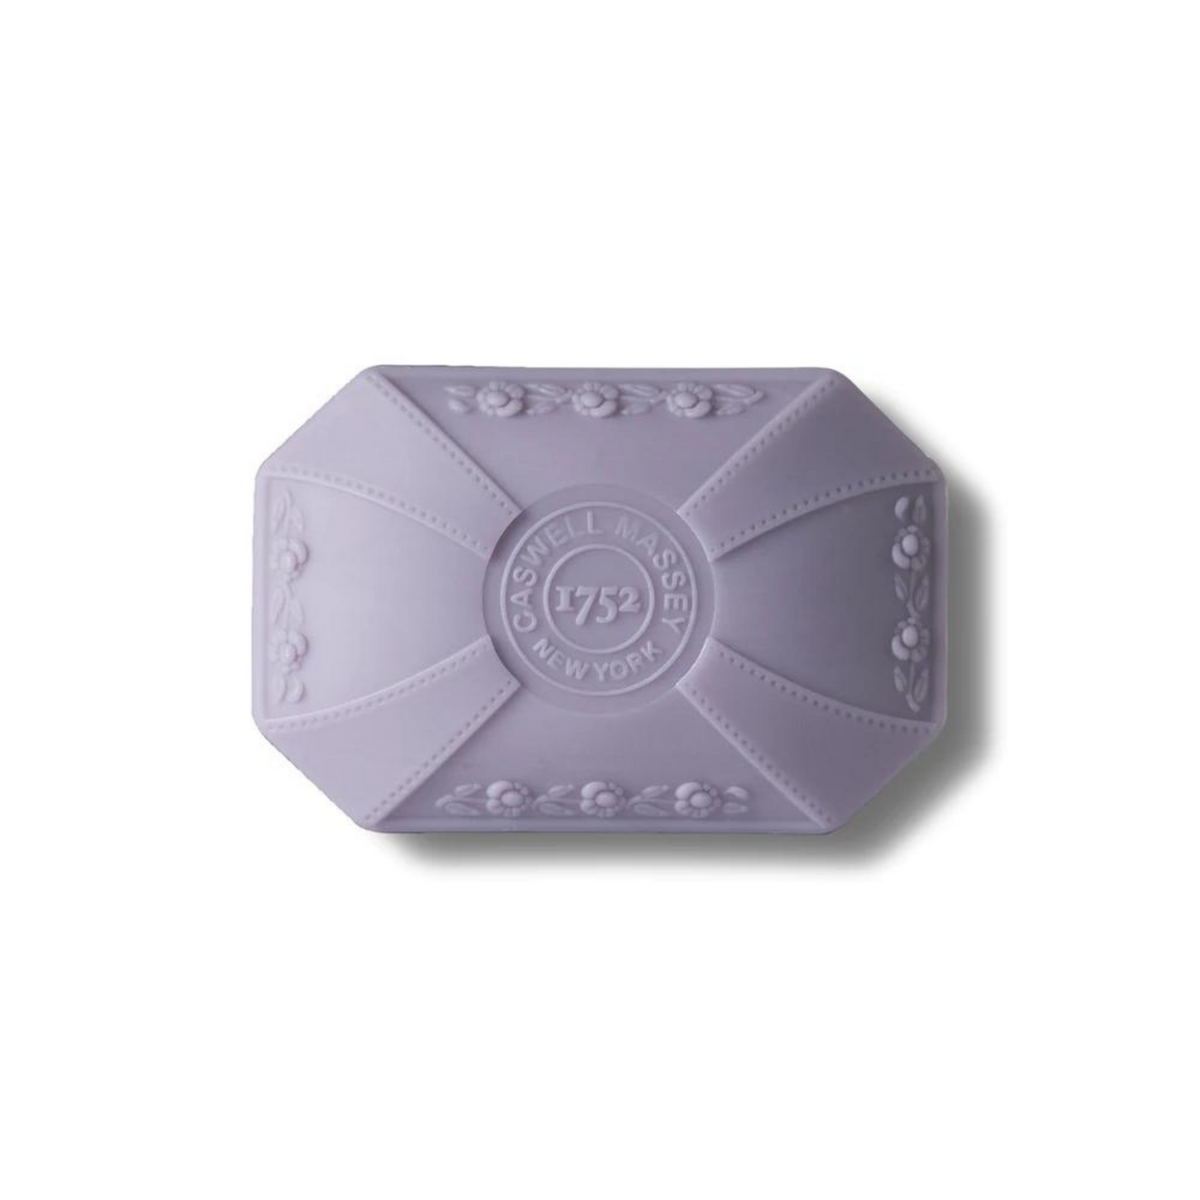 Primary Image of Orchid Bath Soap (3.5 oz)